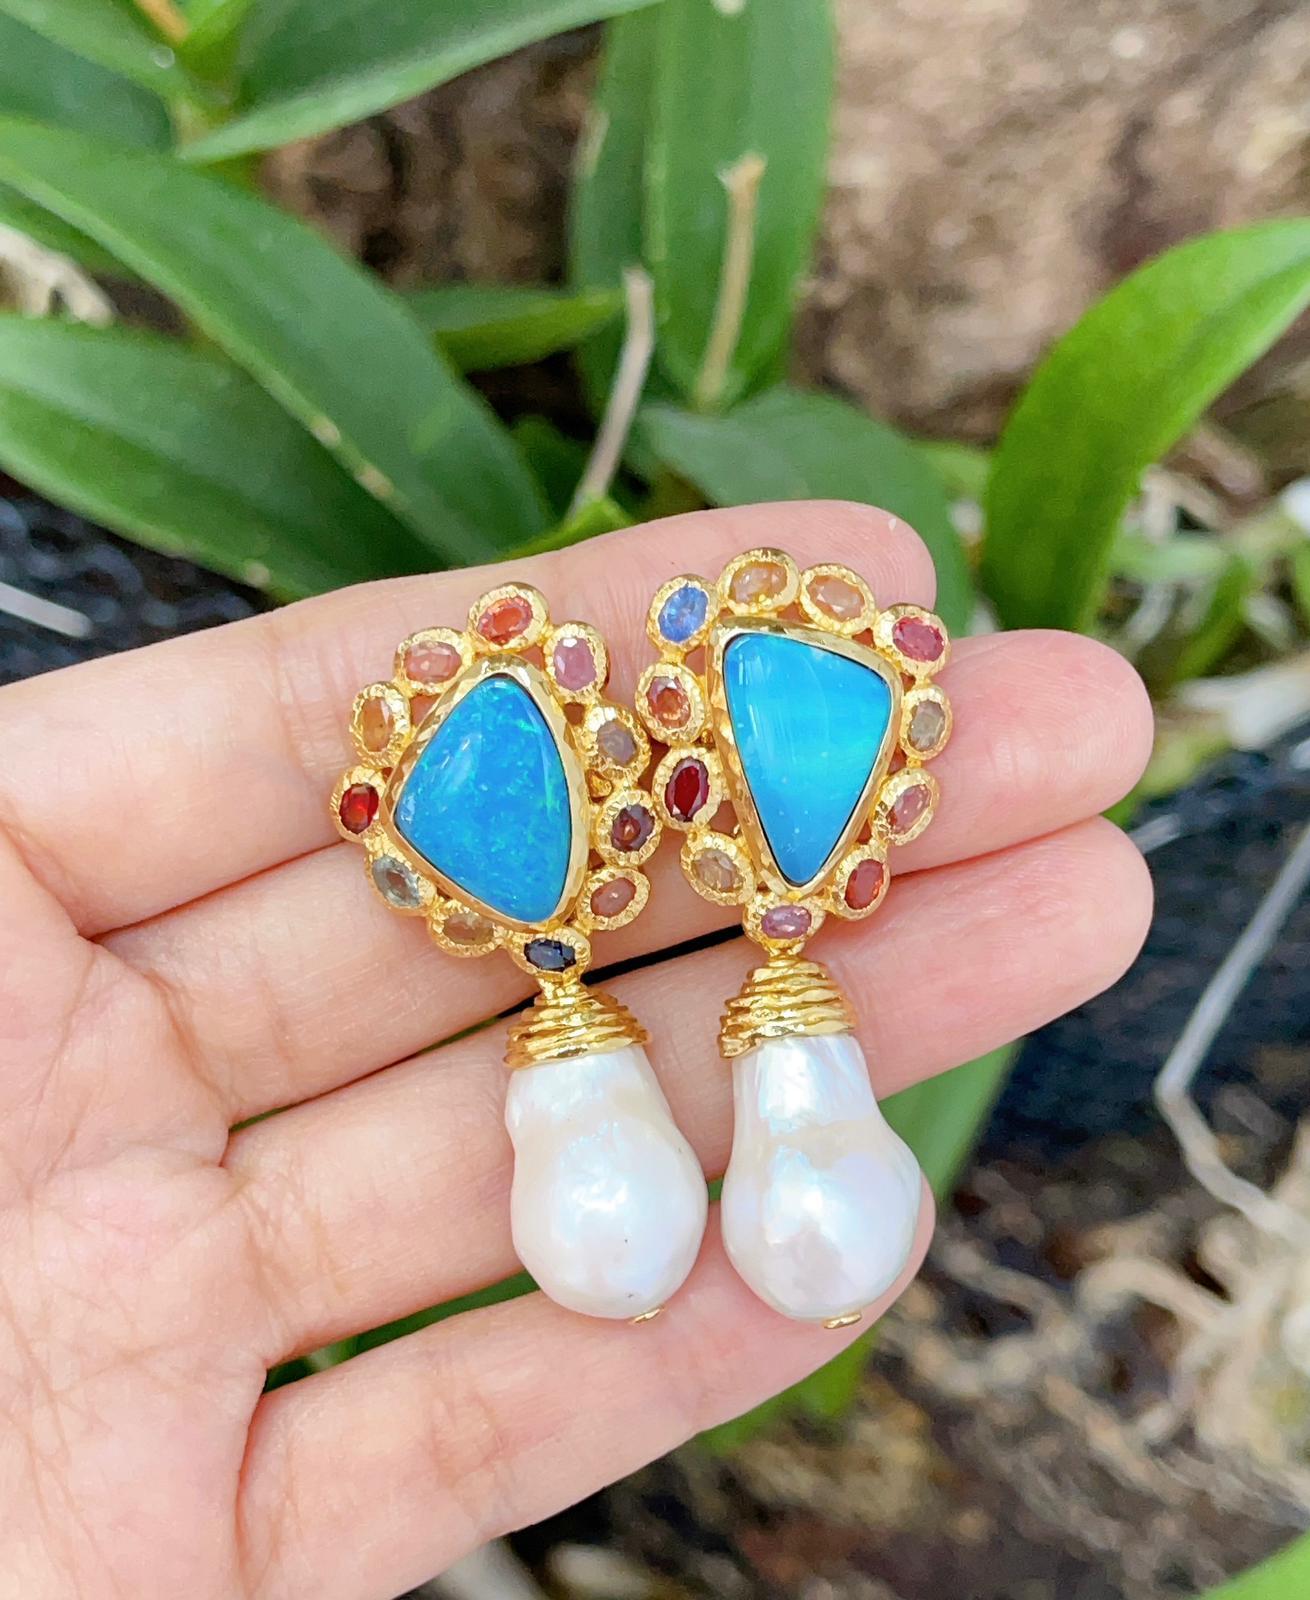 Bochic “Capri” Blue Opal, Barque Pearl & Sapphire Set In 22K Gold & Silver 
Multi natural gem Drop earrings 
Beautiful Natural Blue Opal - 8 carats
Natural multi color Color Sapphires from Sri Lankan  - 6 carats 
Oval brilliant shapes 
Colors: Pink,